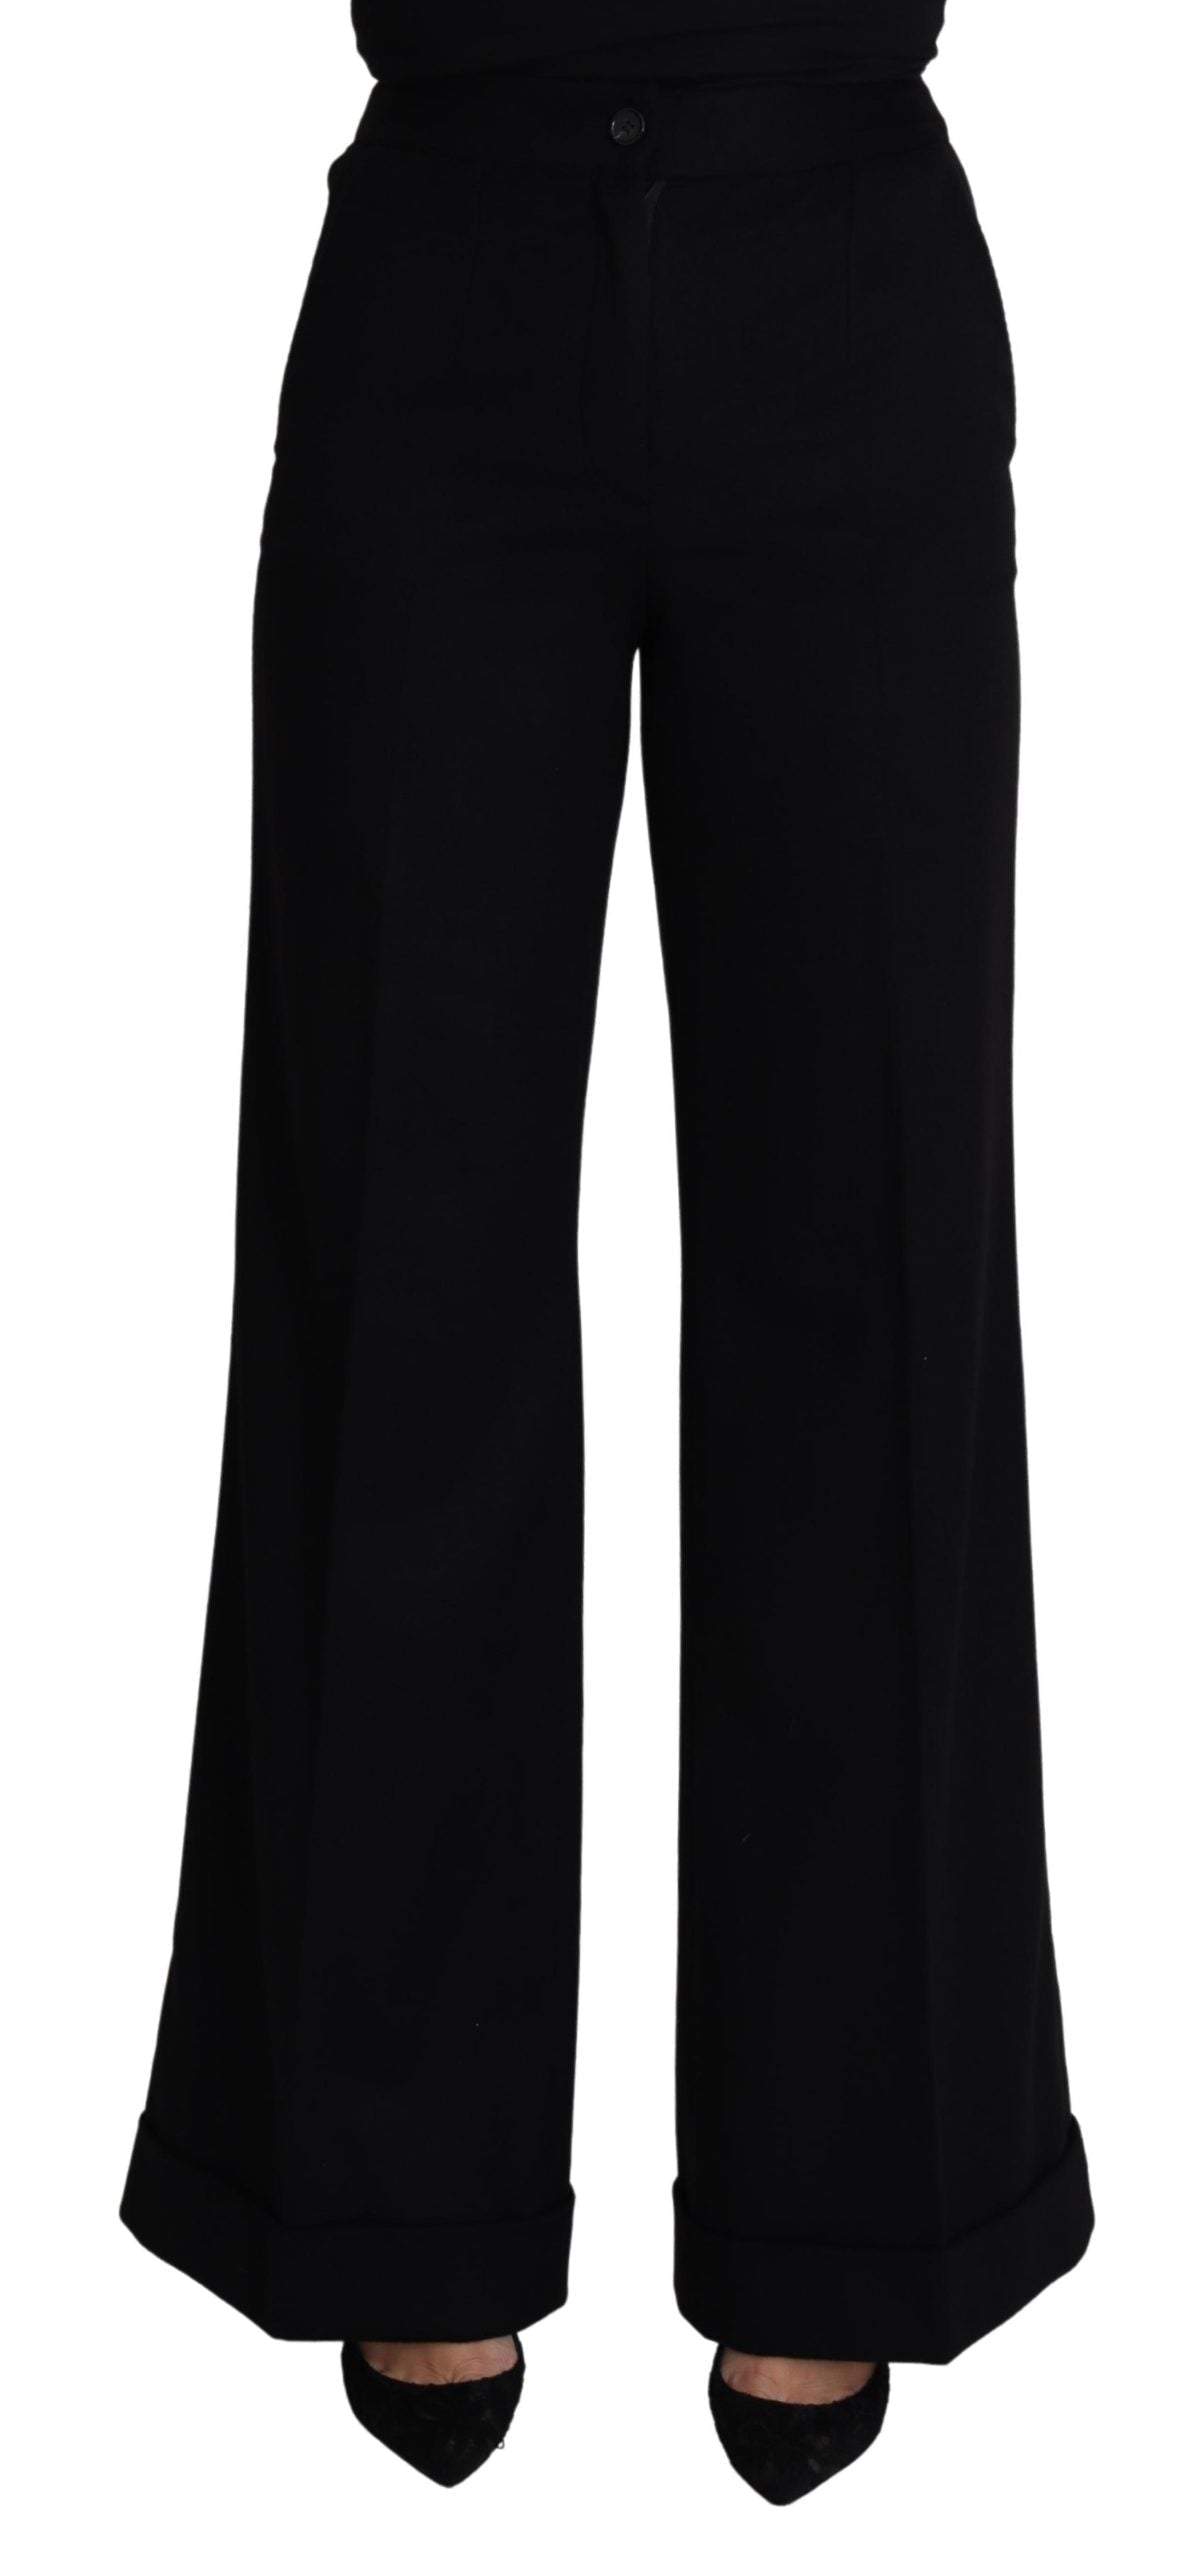 Dolce & Gabbana Black Cashmere Wide Leg Women Trouser Pants #women, Black, Dolce & Gabbana, feed-agegroup-adult, feed-color-black, feed-gender-female, feed-size-IT38|XS, IT38|XS, Jeans & Pants - Women - Clothing, Women - New Arrivals at SEYMAYKA